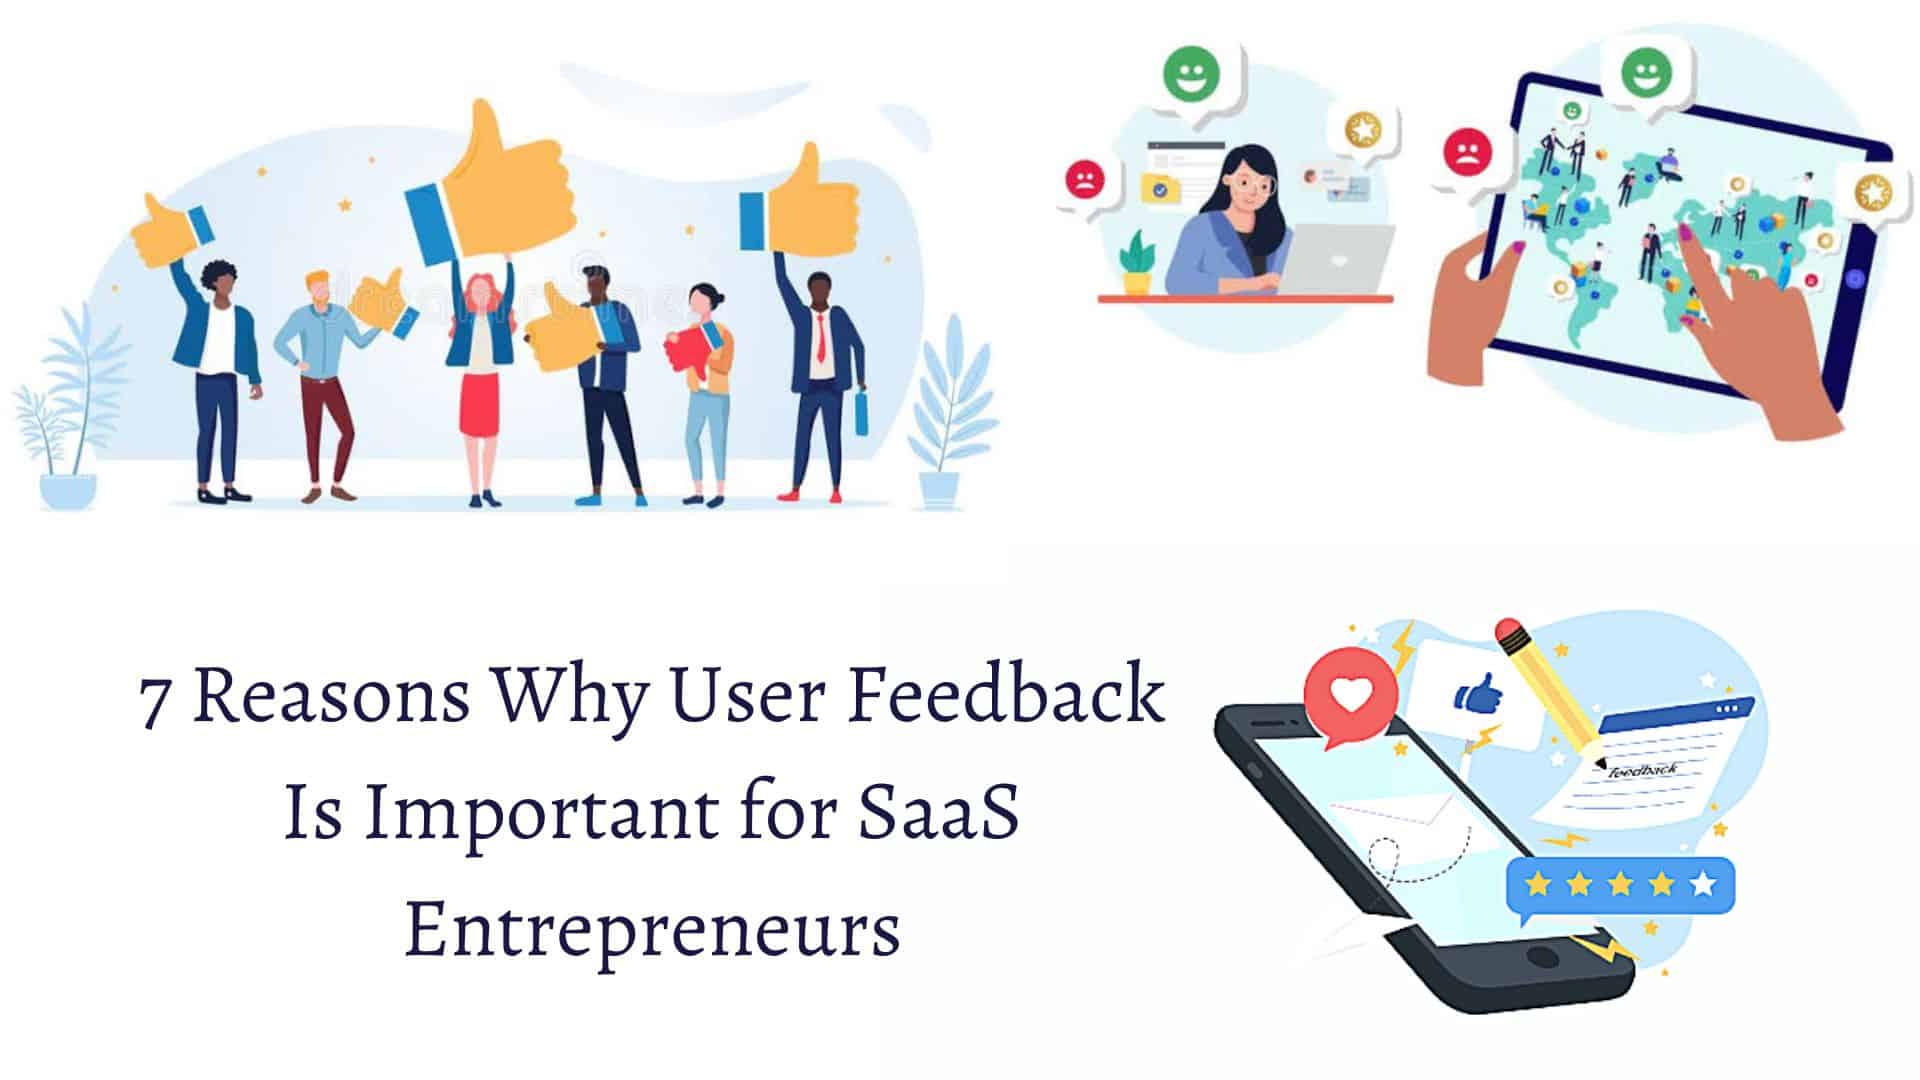 7 Reasons Why User Feedback Is Important for SaaS Entrepreneurs